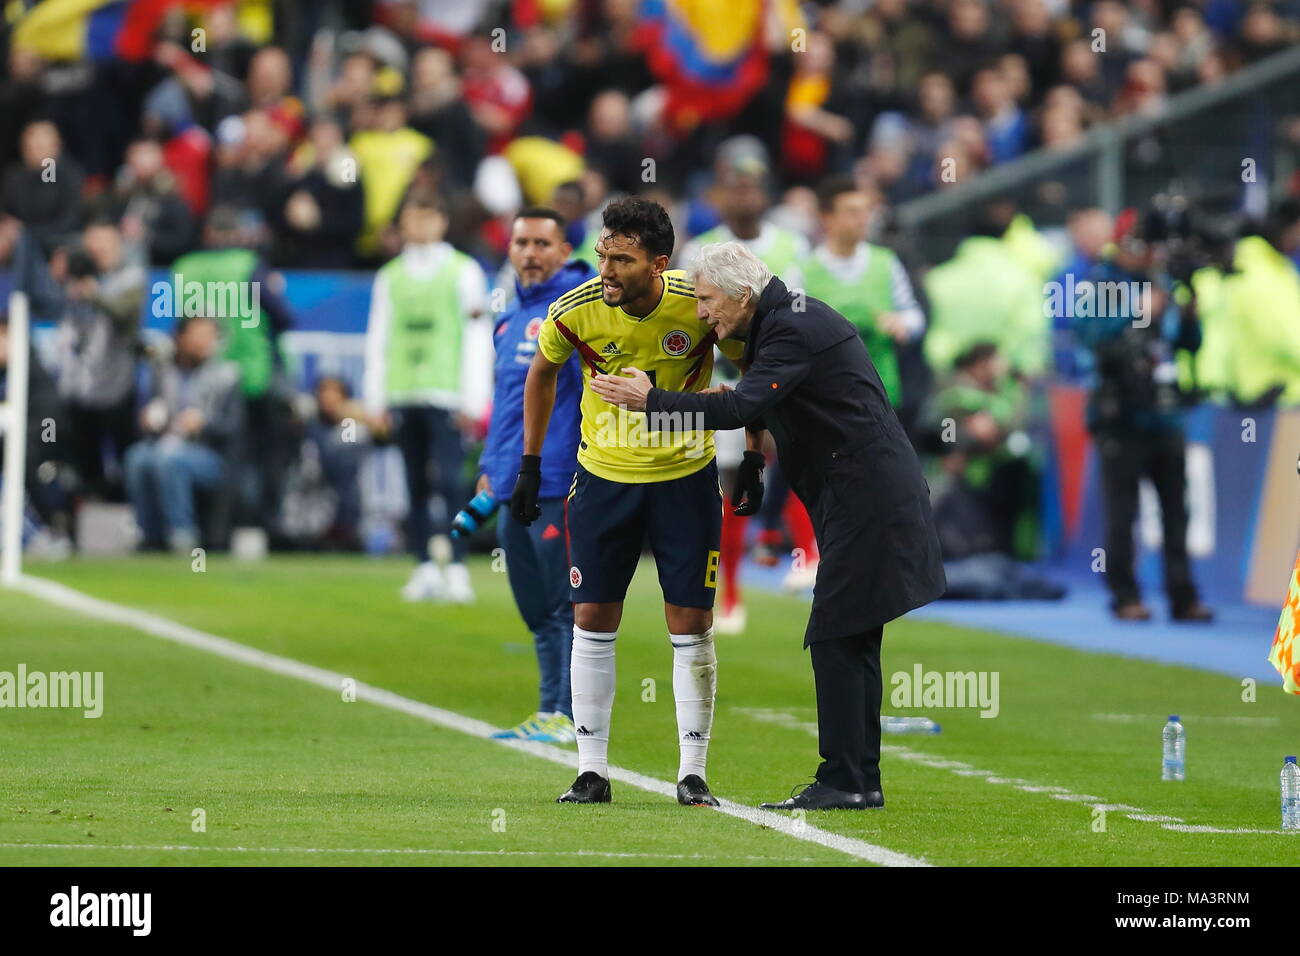 Saint-Denis, France. 23rd Mar, 2018. (L-R) Abel Aguilar, Jose Pekerman (COL) Football/Soccer : International friendly match between France 2-3 Colombia at the Stade de France in Saint-Denis, France . Credit: Mutsu Kawamori/AFLO/Alamy Live News Stock Photo